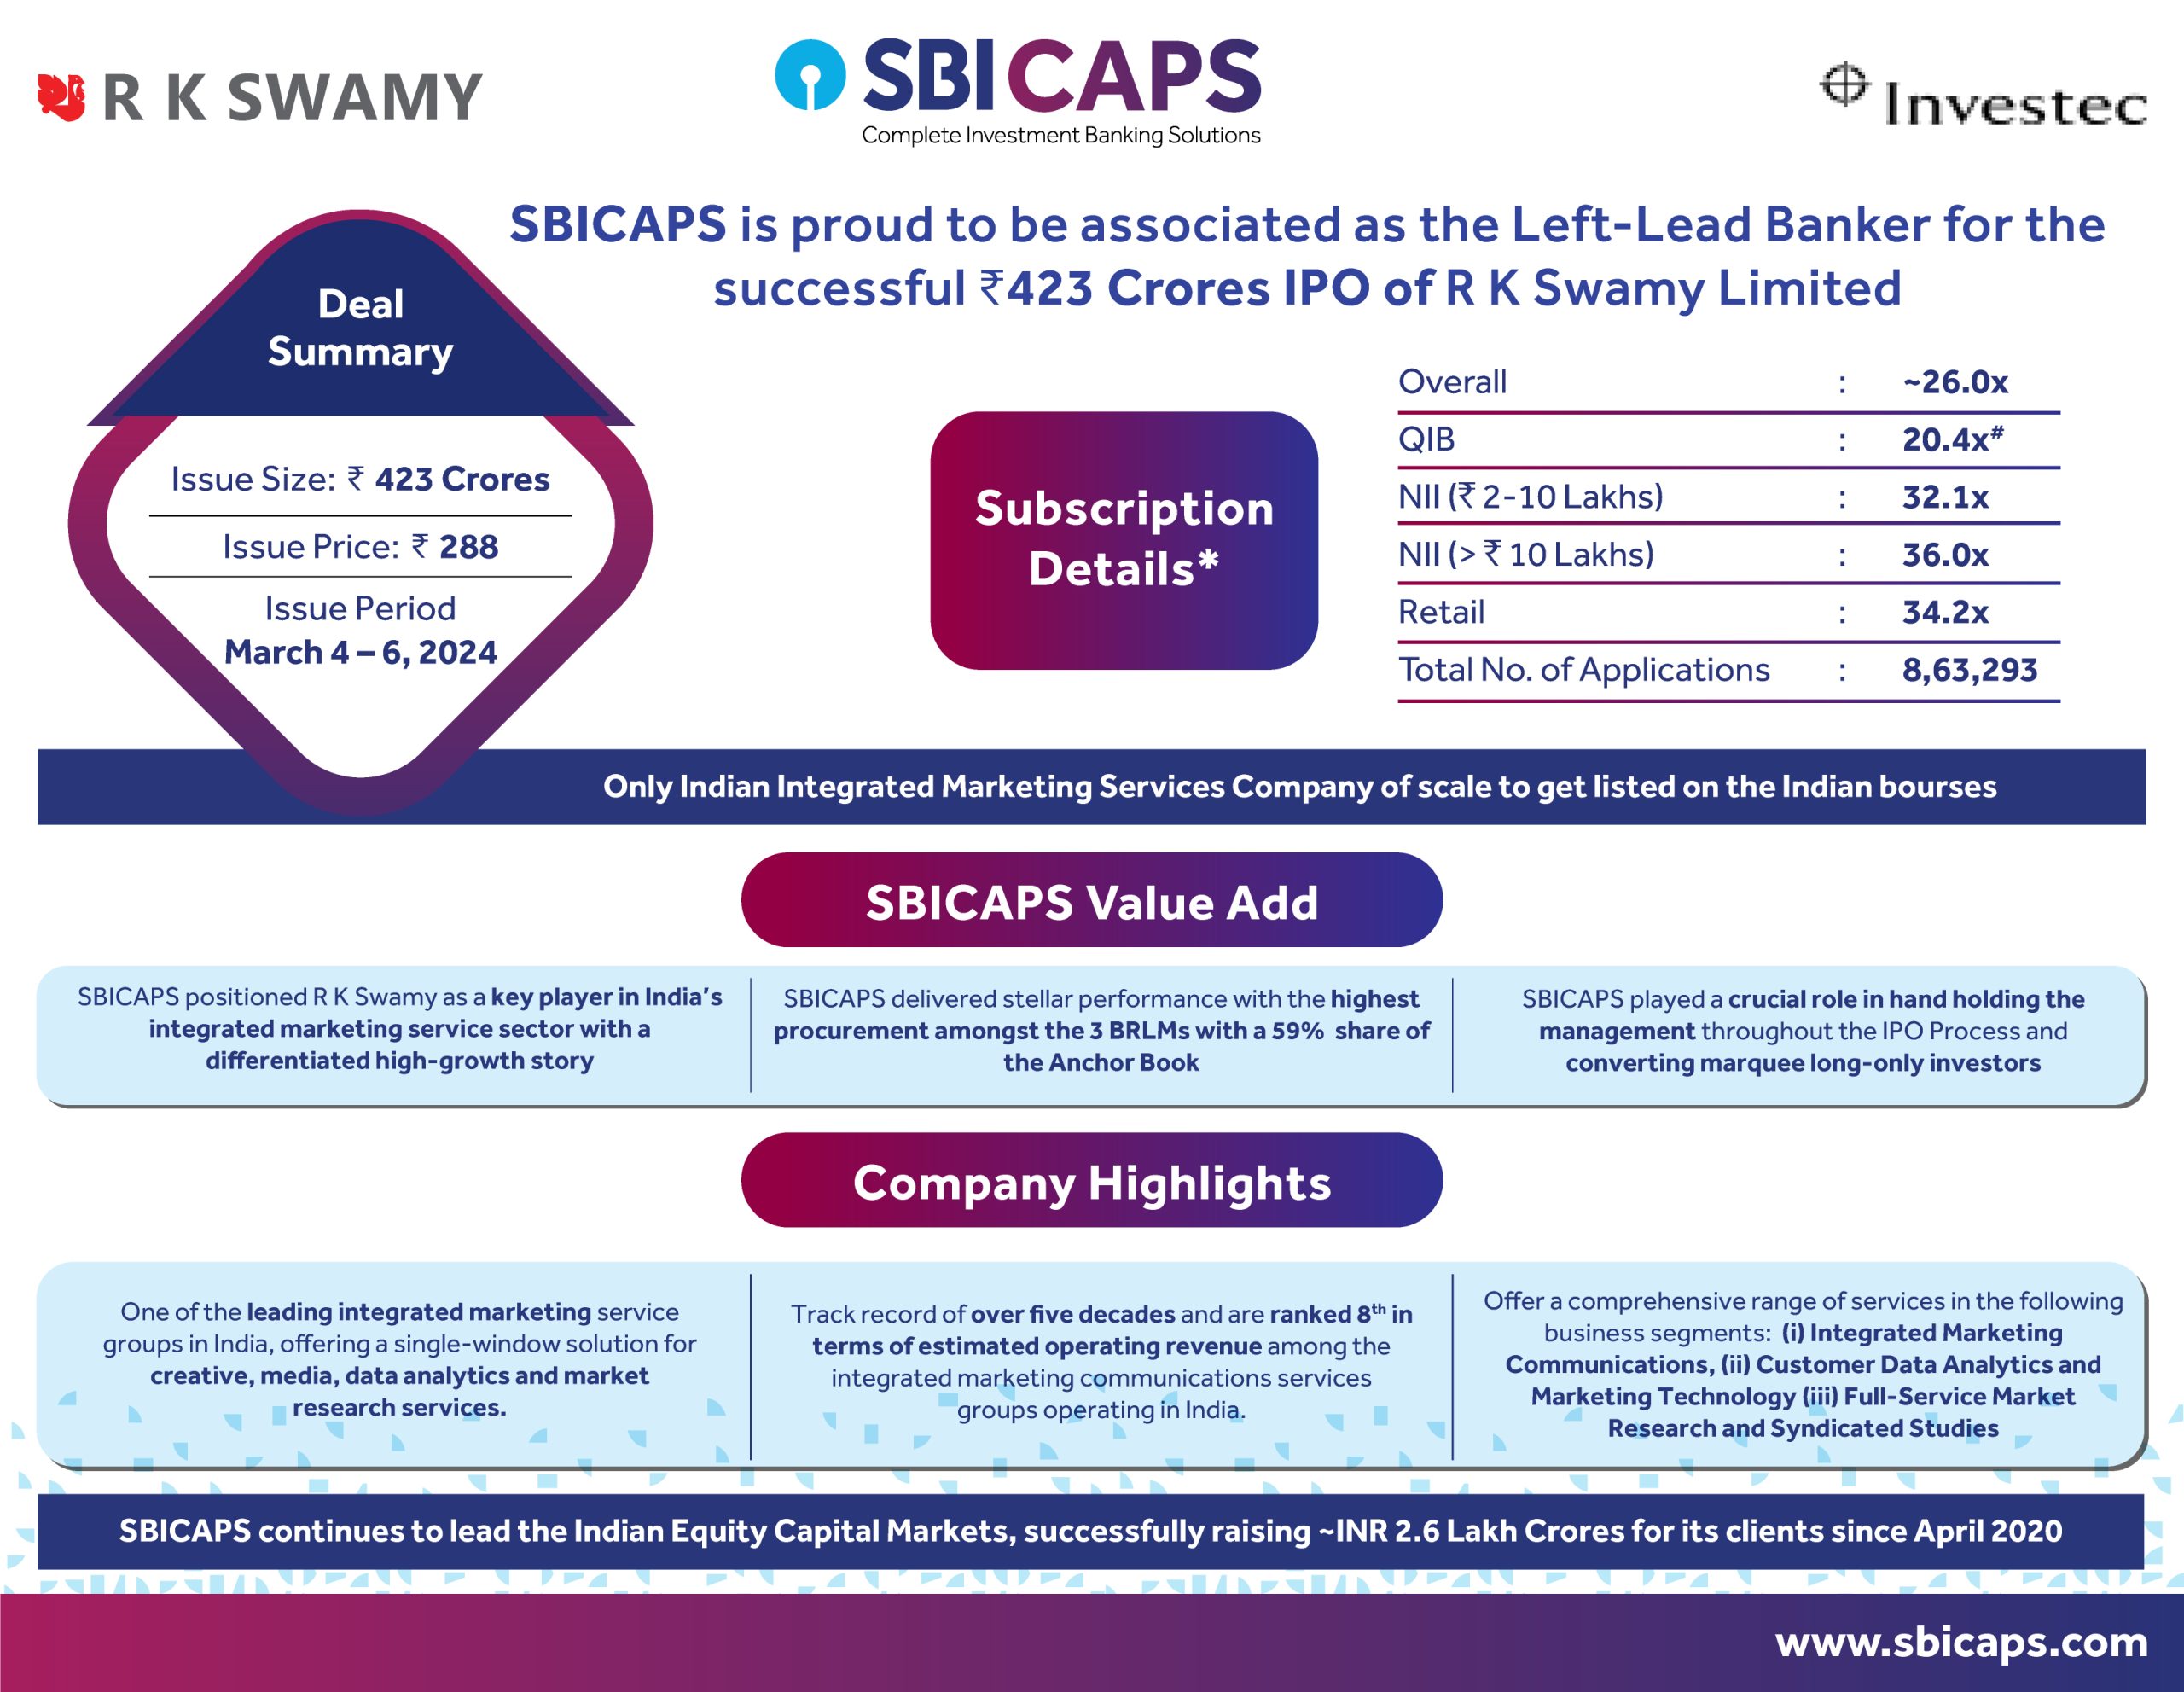 SBICAPS is proud to be associated as the Left-Lead Banker for the successful INR 423 Crores IPO of R K Swamy Limited.